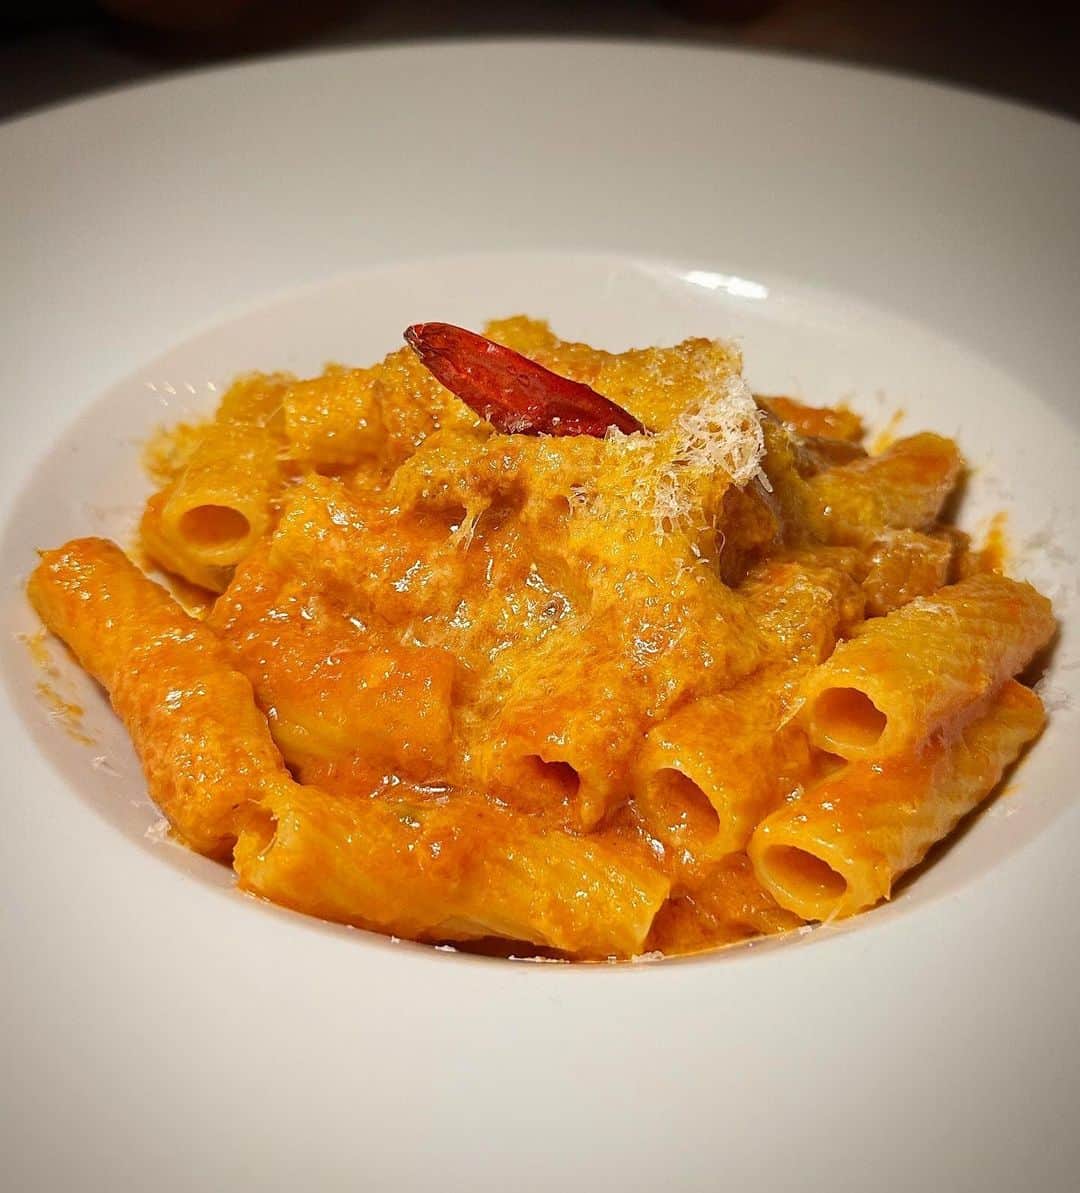 Arancino at The Kahalaのインスタグラム：「RIGATONI AMATRICIANA  a classic dish from Amatrice Italy when shepherds would bring cheese and pieces of pork jowl with them during long stays away from home and cook them in an iron pan! 🤌🏽🇮🇹 #arancinokahala #haleainaawards #arancino #arancinoristoranteitaliano #honolulu #amatriciana #pasta #kahala #hawaii #アランチーノ #アランチーノアットザカハラ #イタリアン #パスタ #ハワイ #ホノルル #oahu #onion #hawaiifoodreviews #hawaiisbestkitchens #italianrestaurant #italian #guanciale #amatriciana #oahu #italy #porkjowl #dinner #rigatoni #tomatosauce #noodles #amatrice」